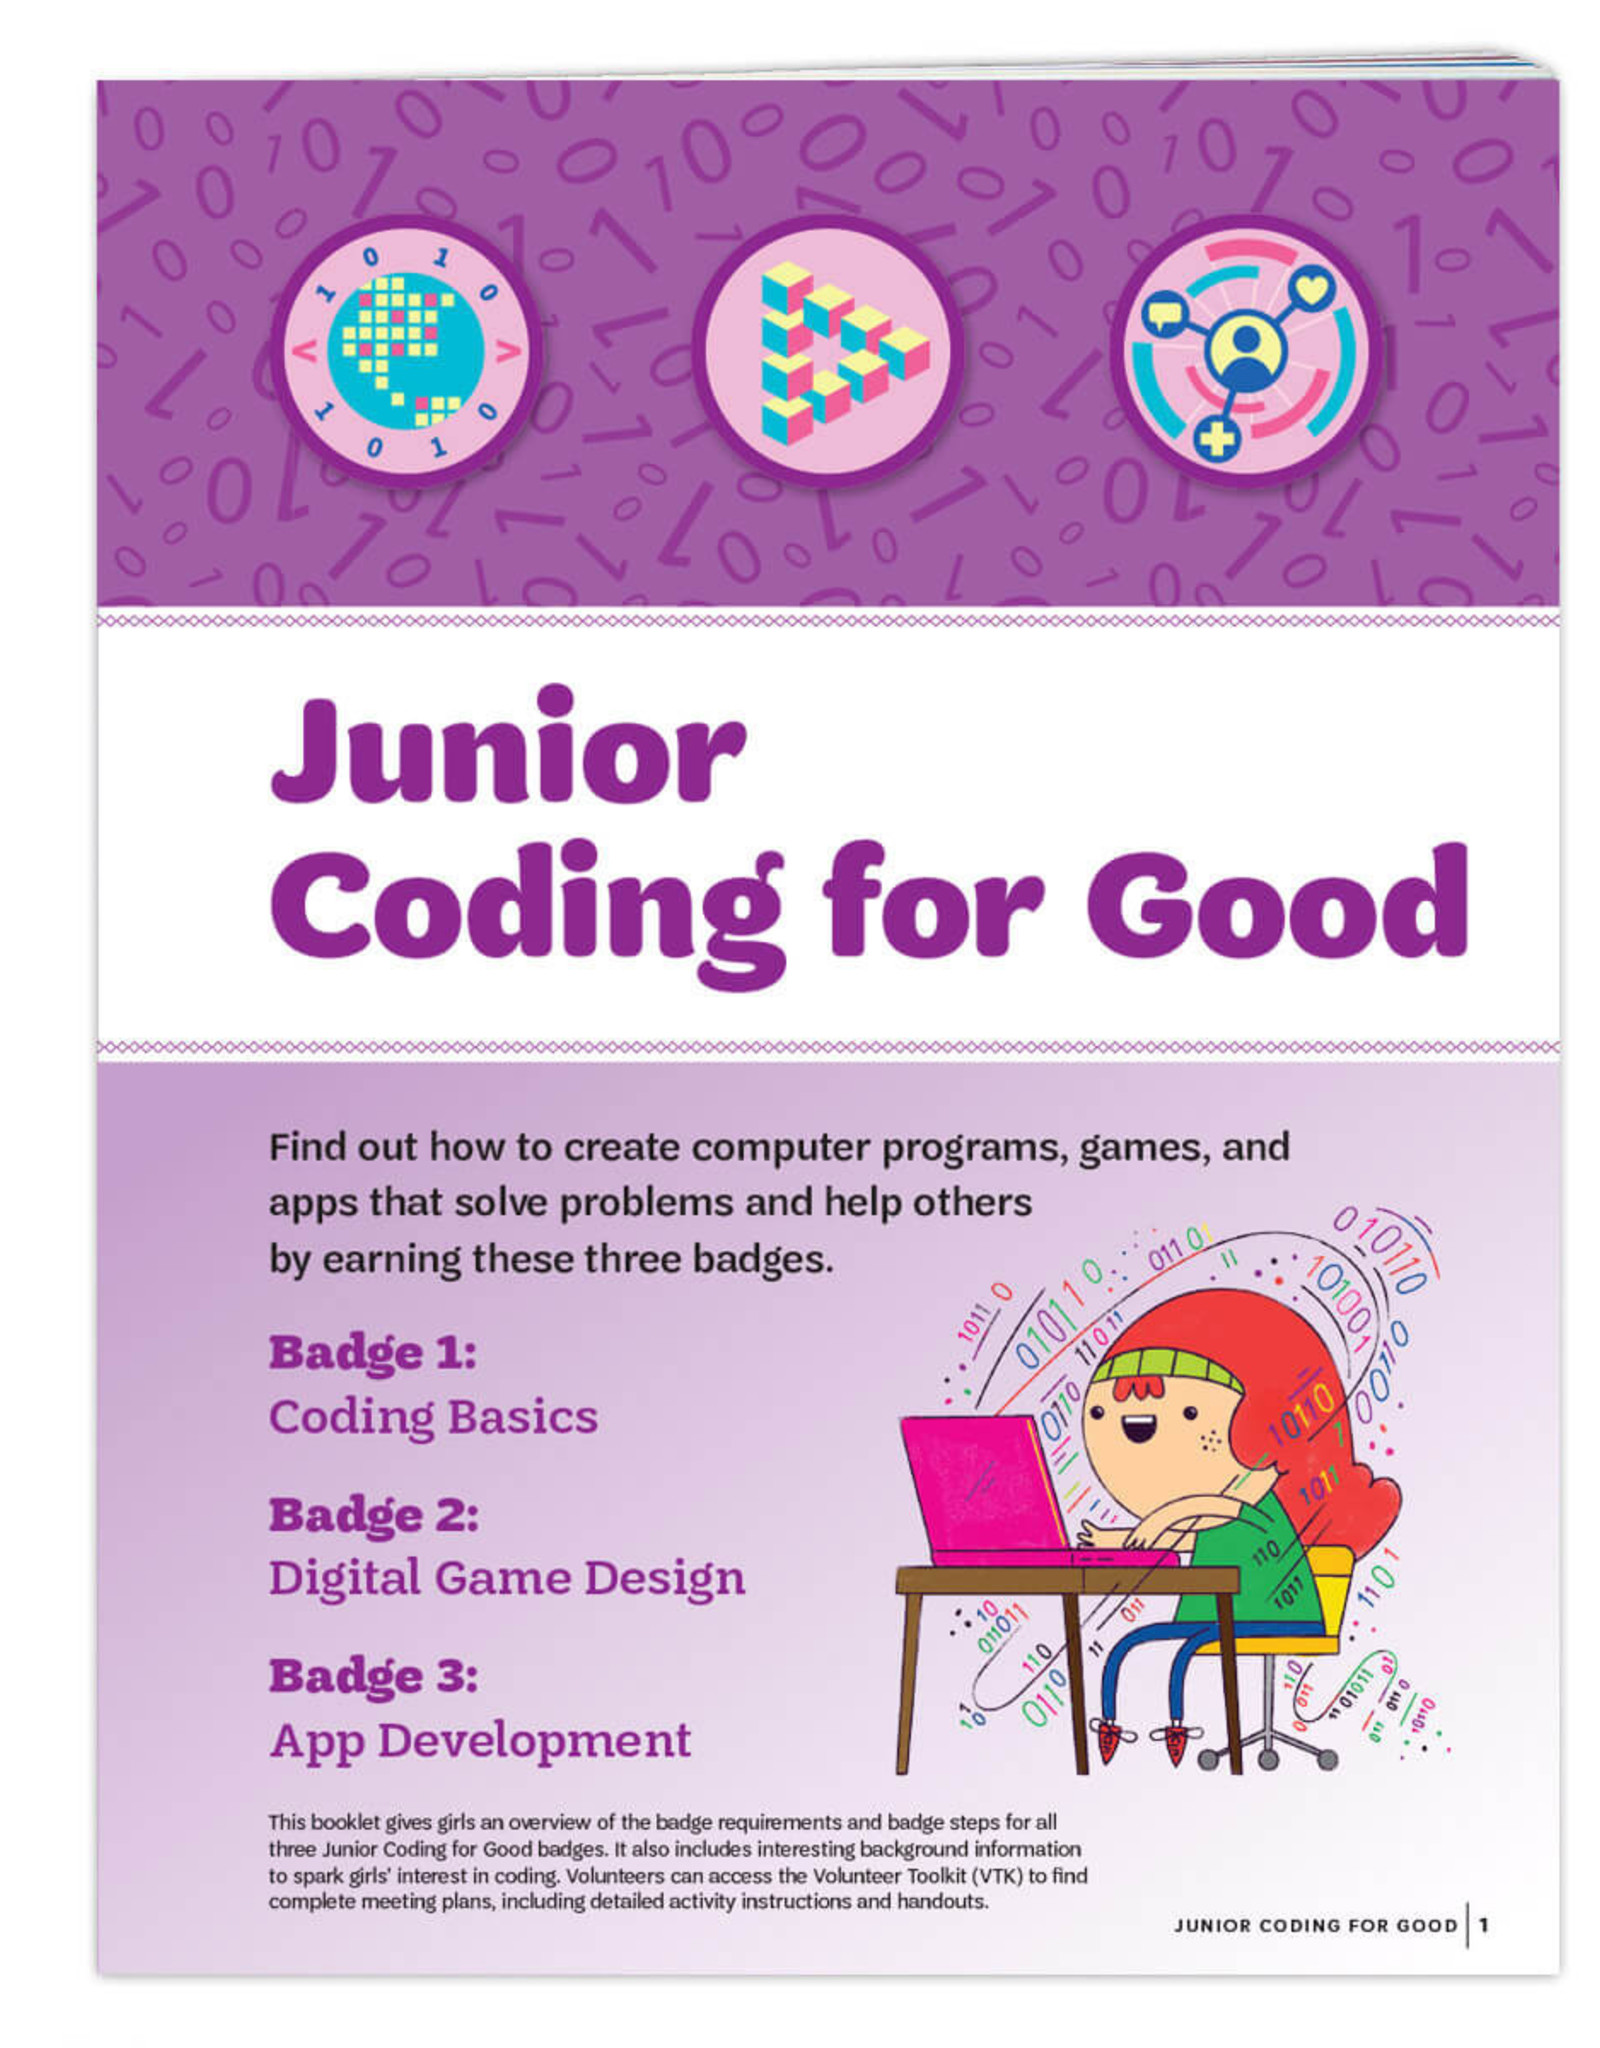 GIRL SCOUTS OF THE USA Junior Coding For Good Requirements Pamphlet